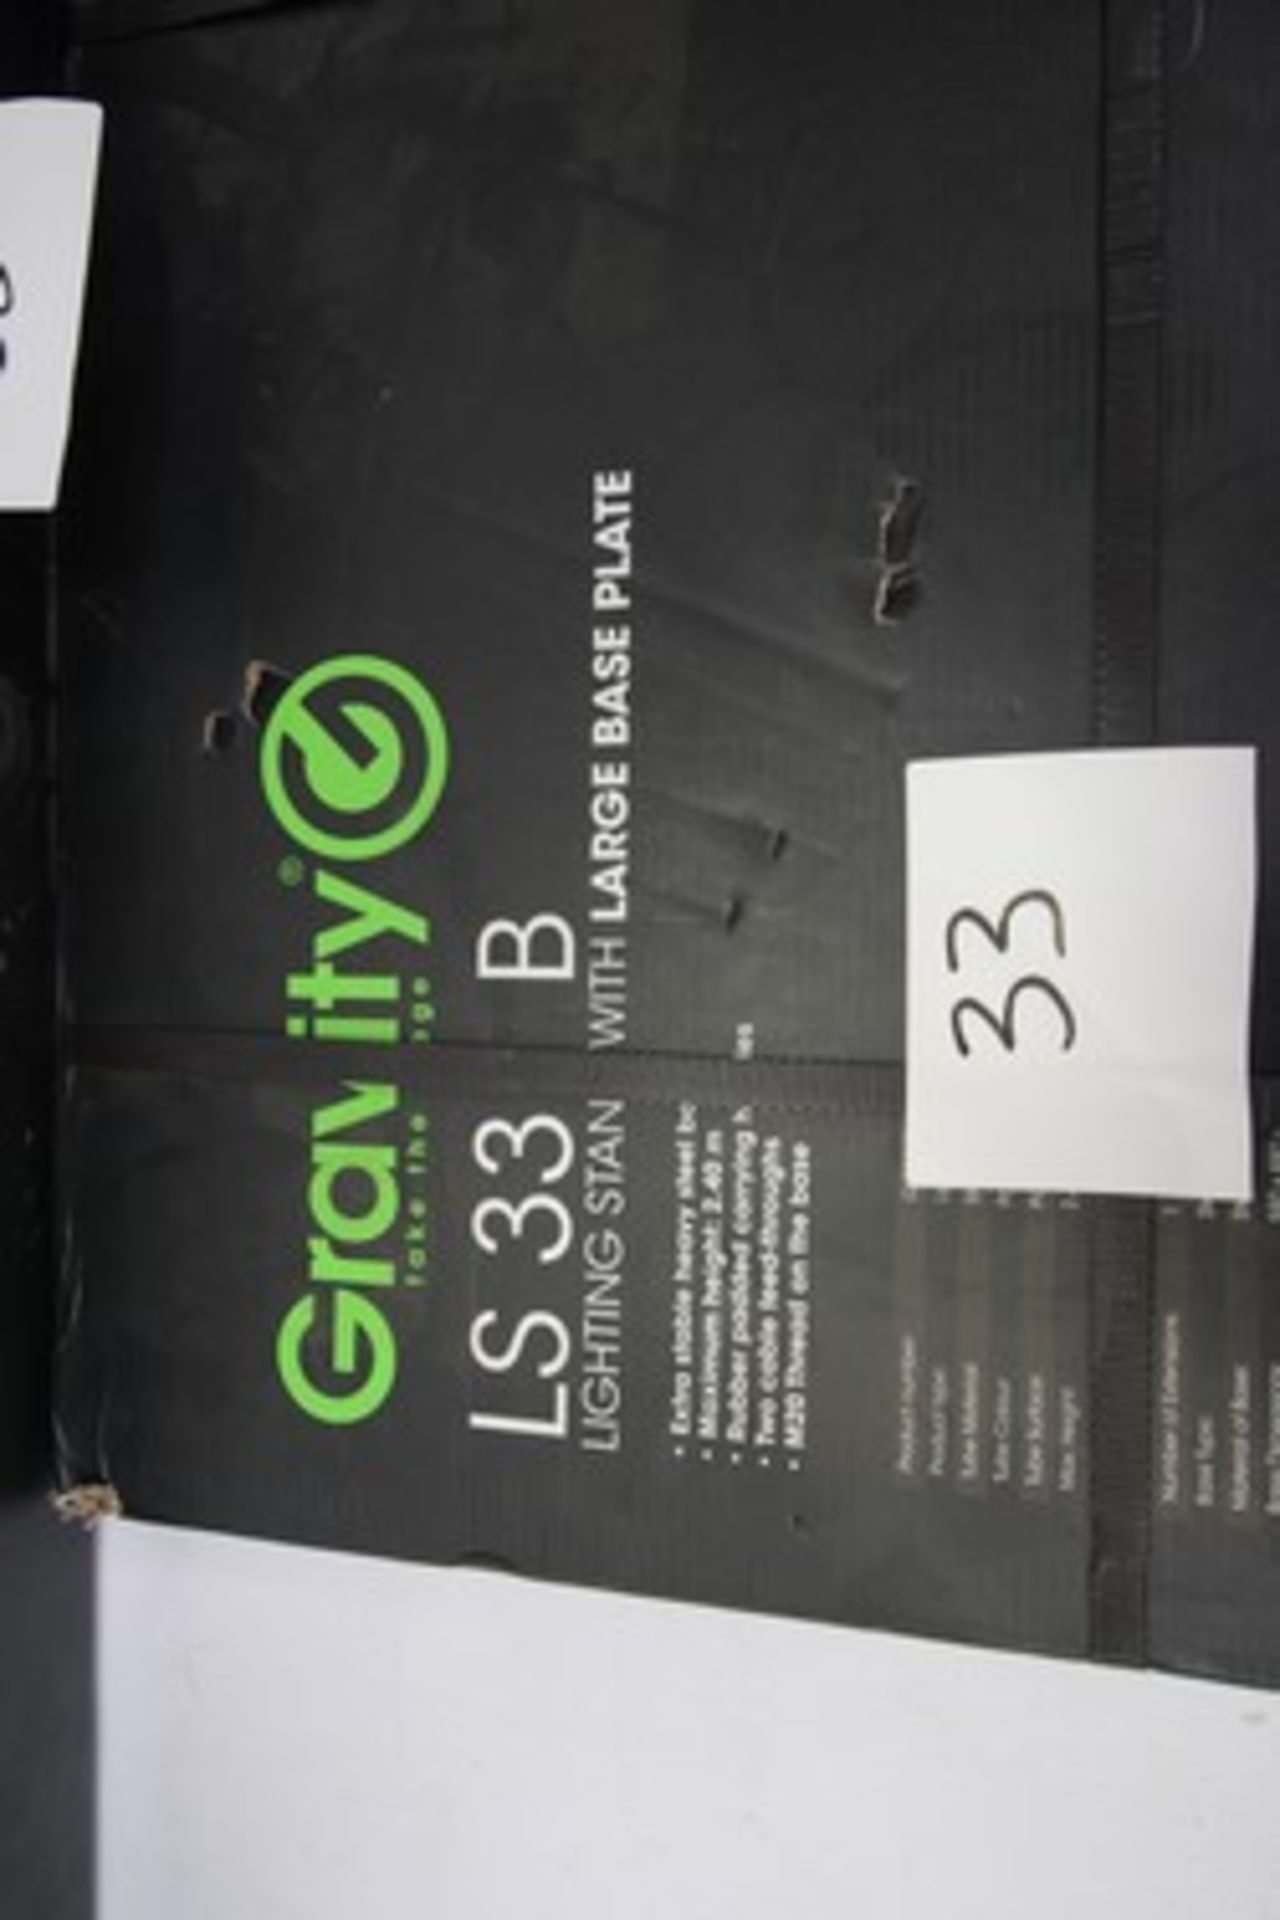 1 x Gravity large lighting stand with base, ref: LS331B - sealed new in box (ES5) - Image 2 of 3